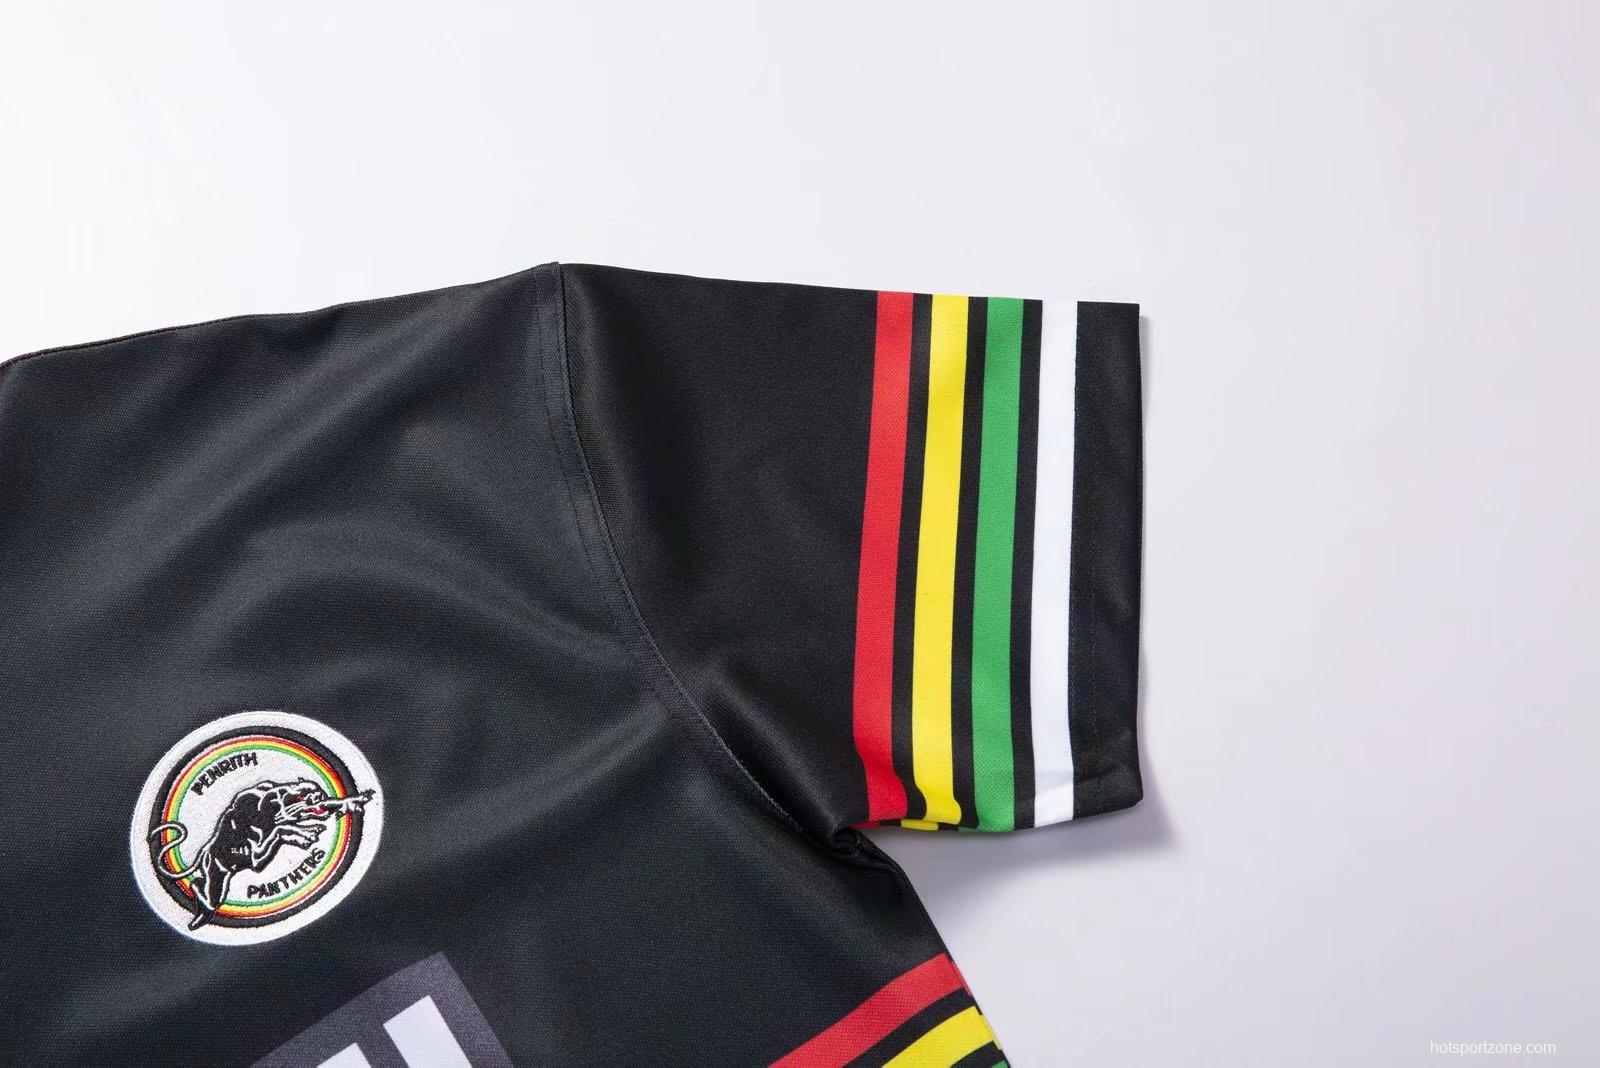 Penrith Panthers 1991 Retro Rugby Jersey